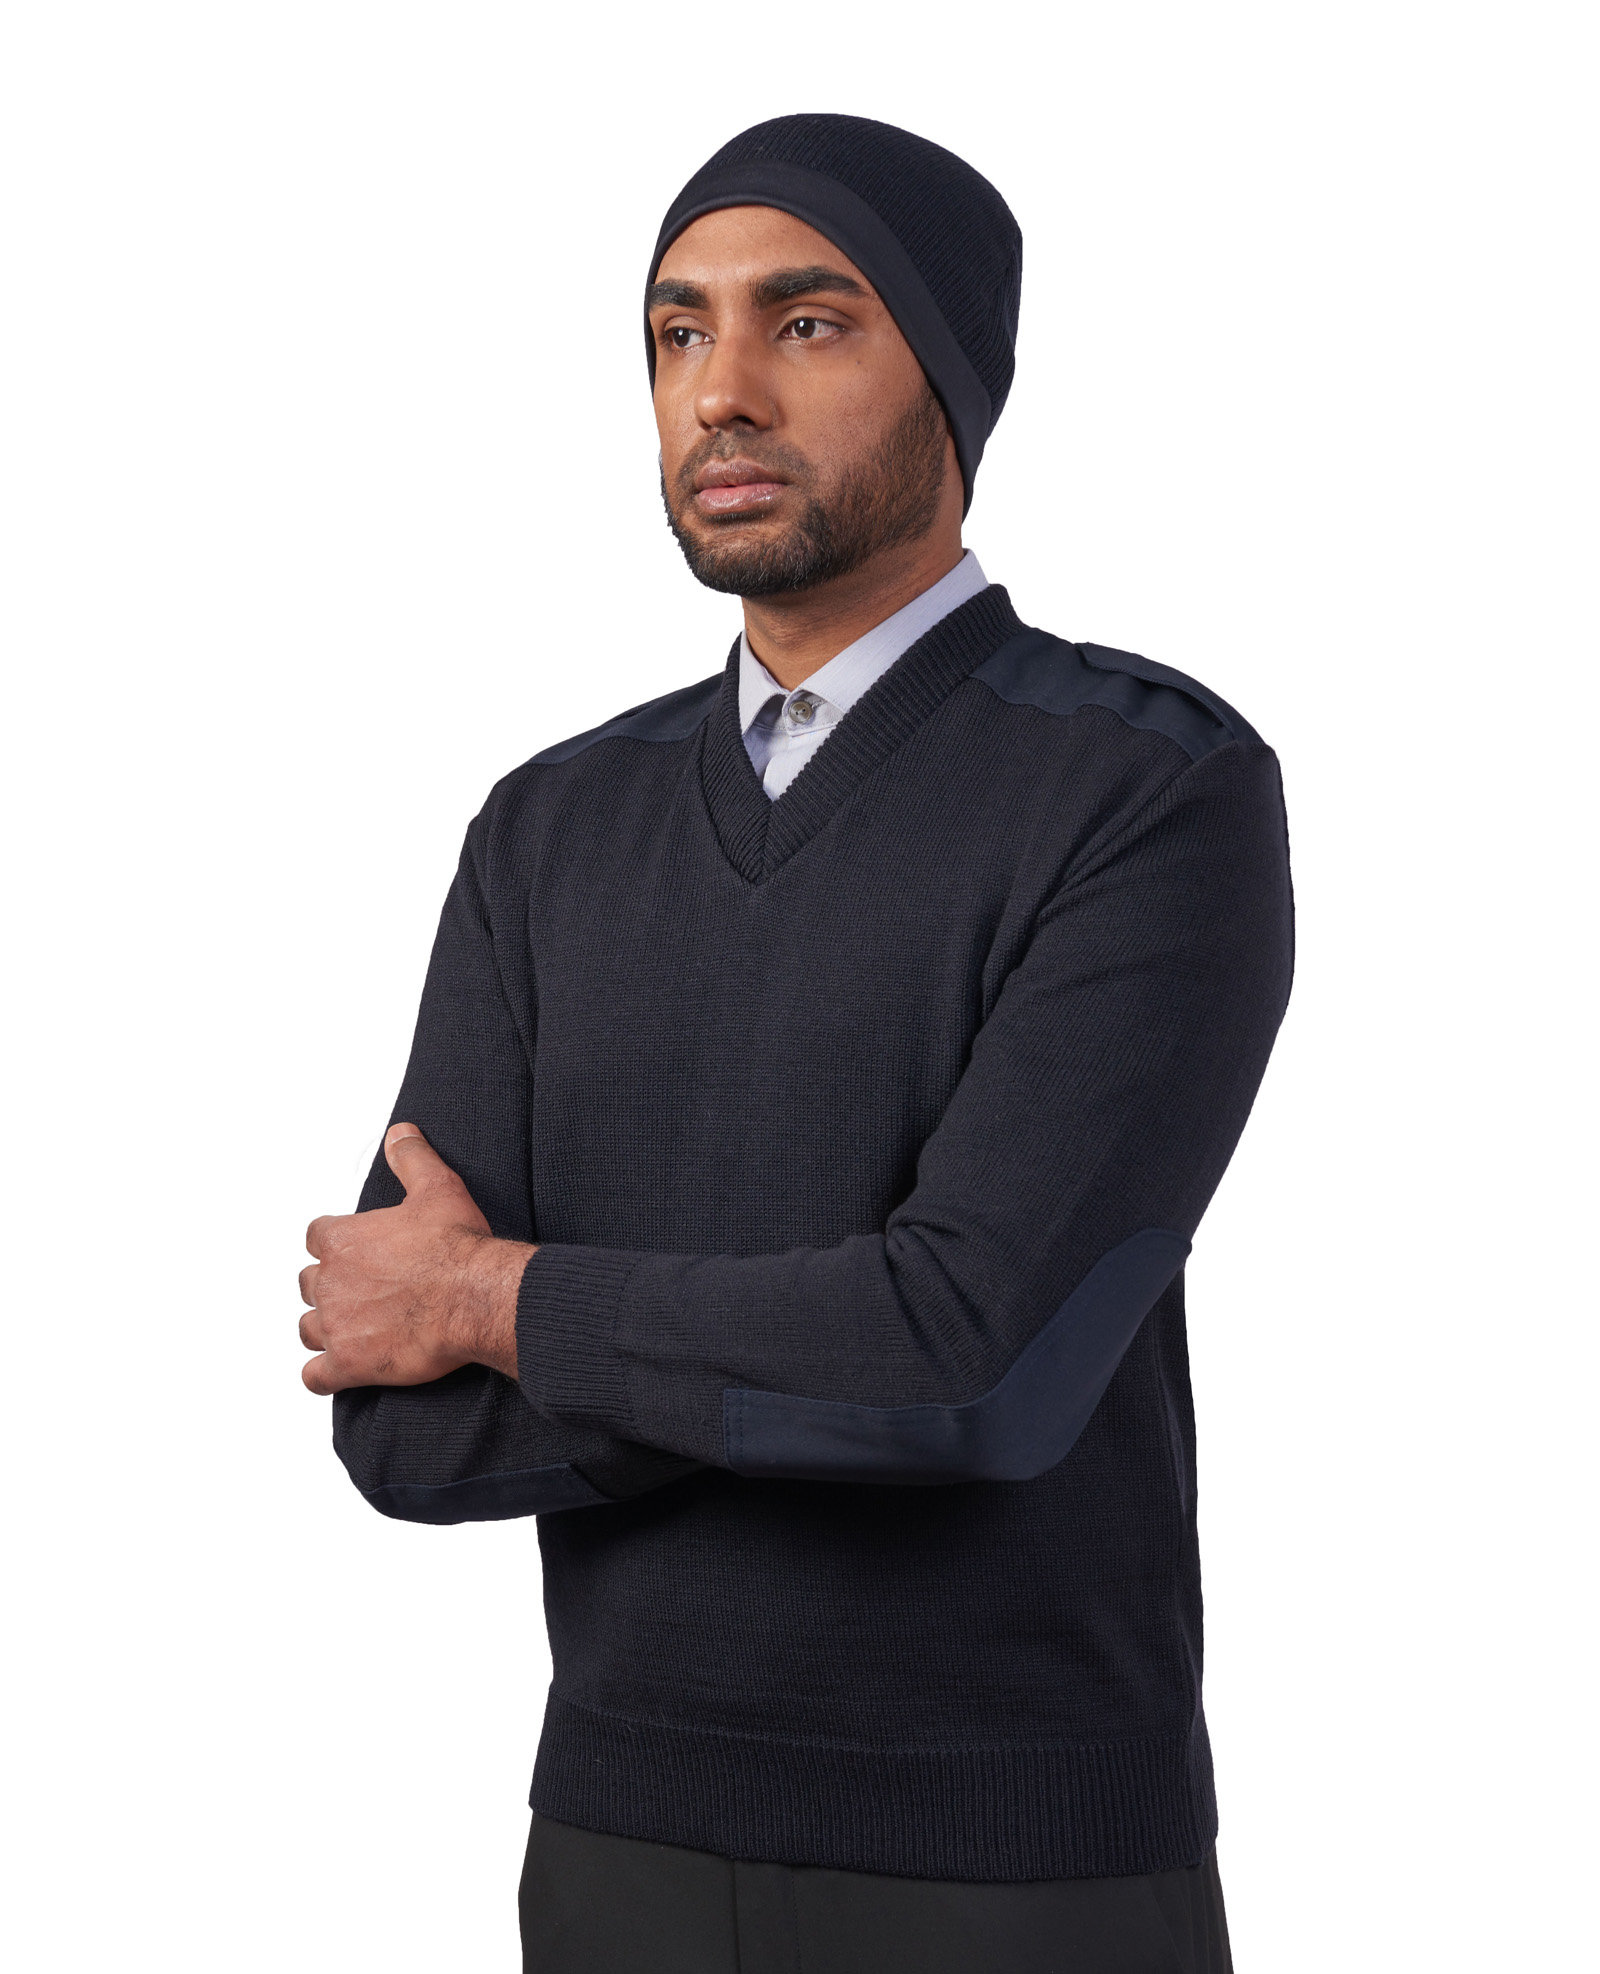 Man in navy v-neck knit sweater with shoulder and elbow patches